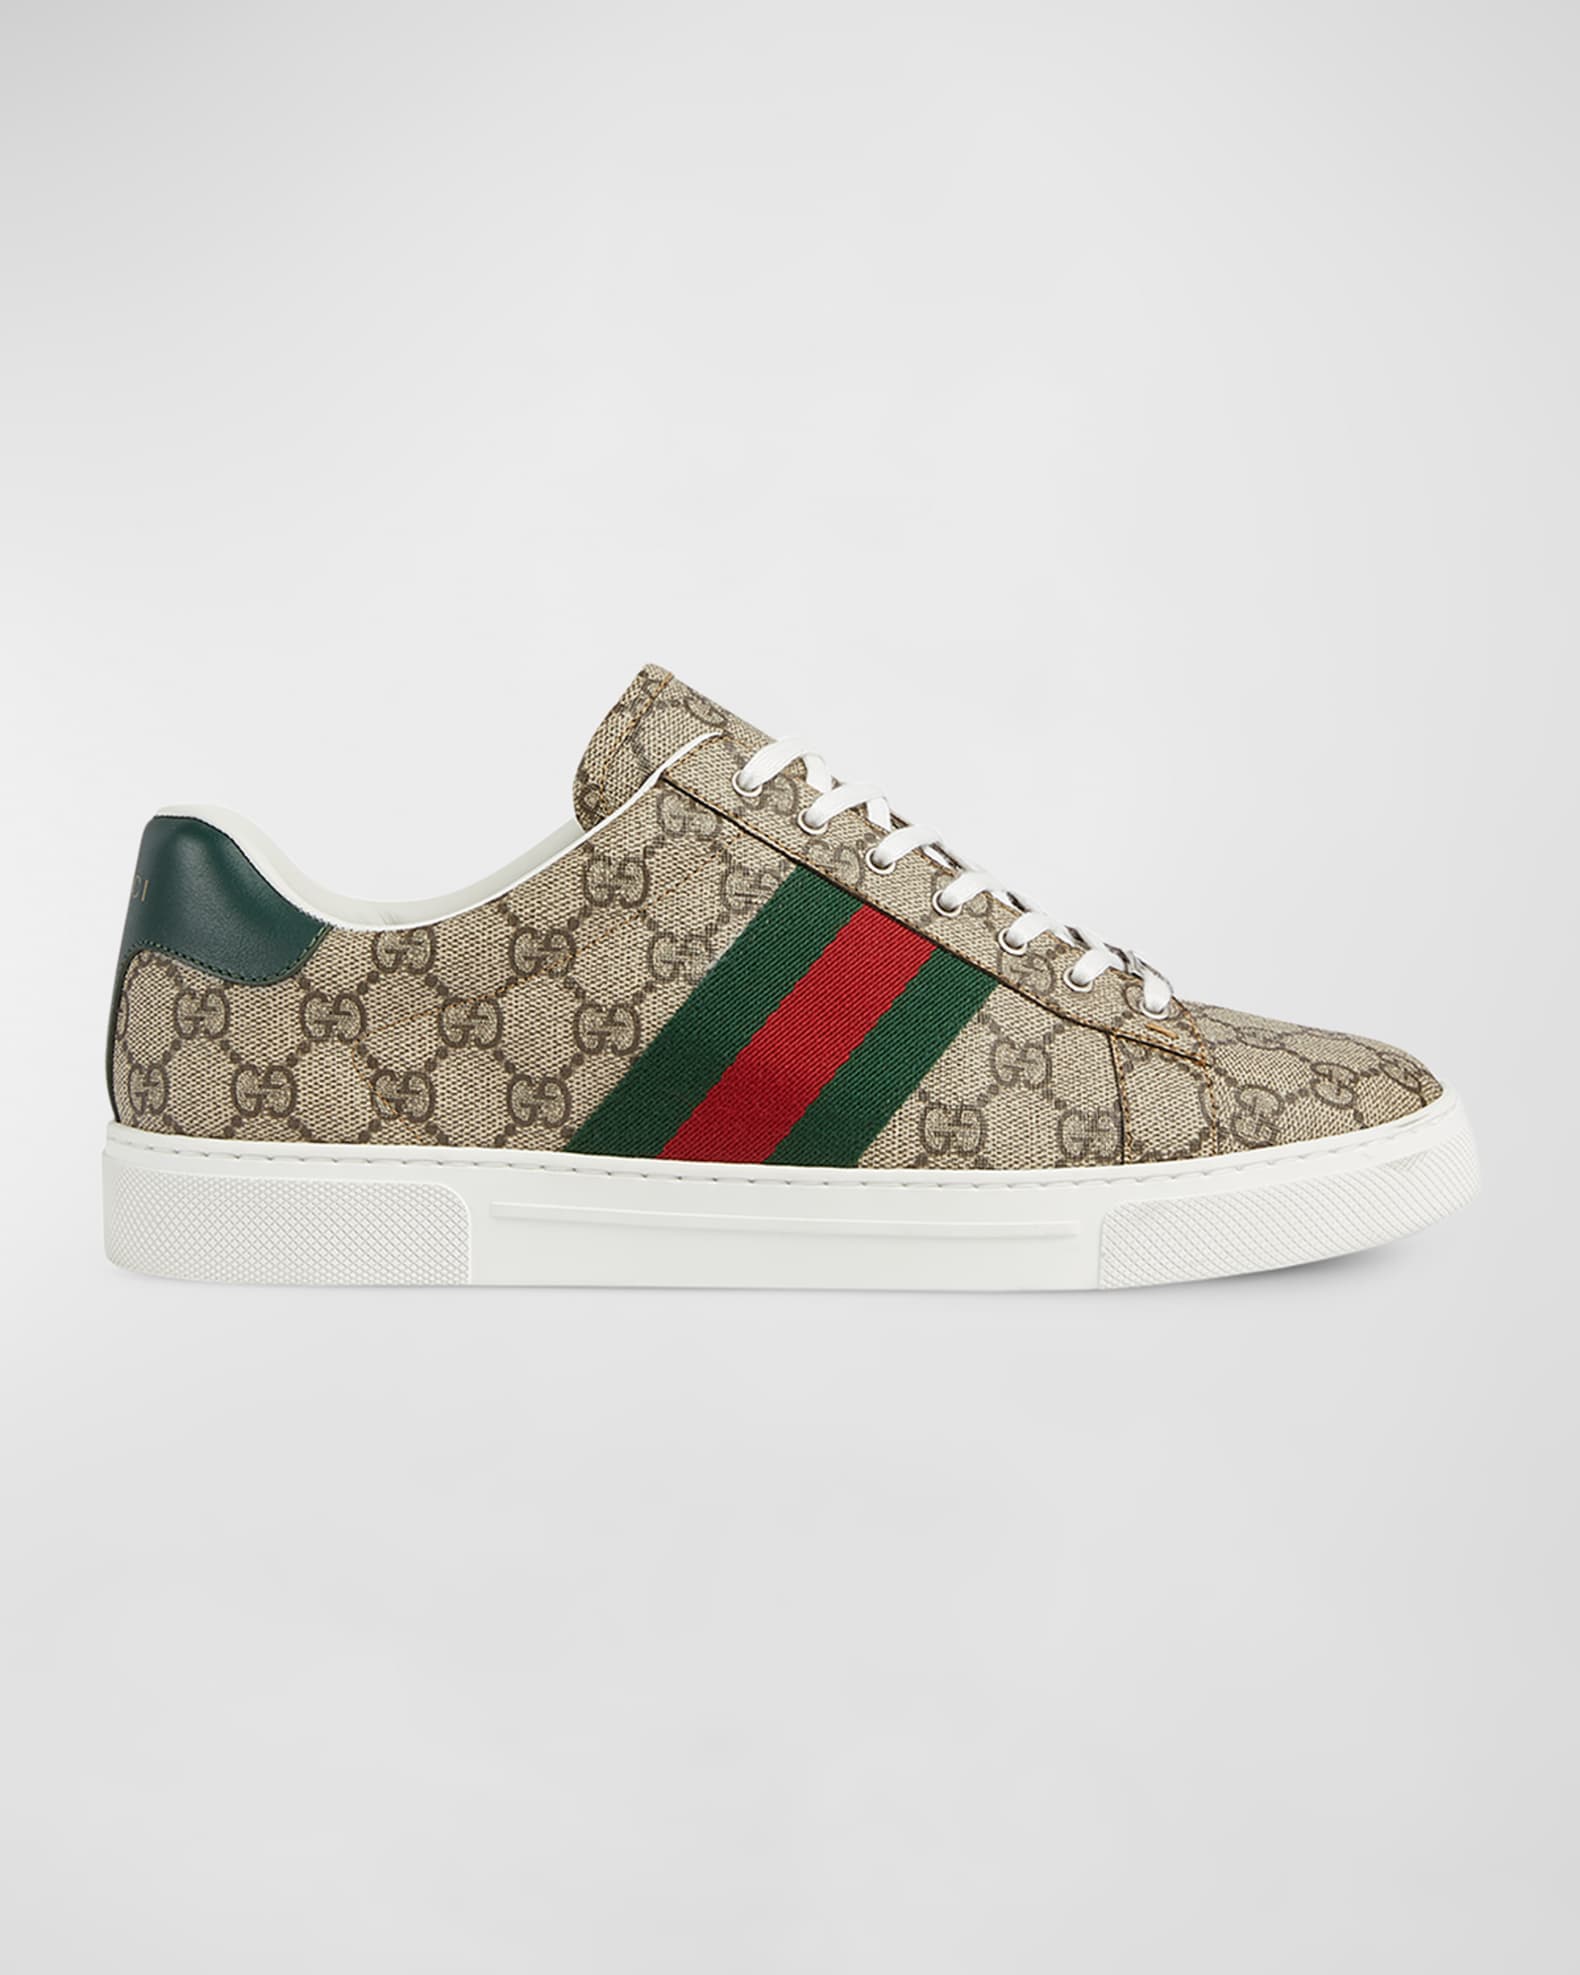 Gucci Men's Gucci Ace Low-Top Sneakers with Web | Neiman Marcus